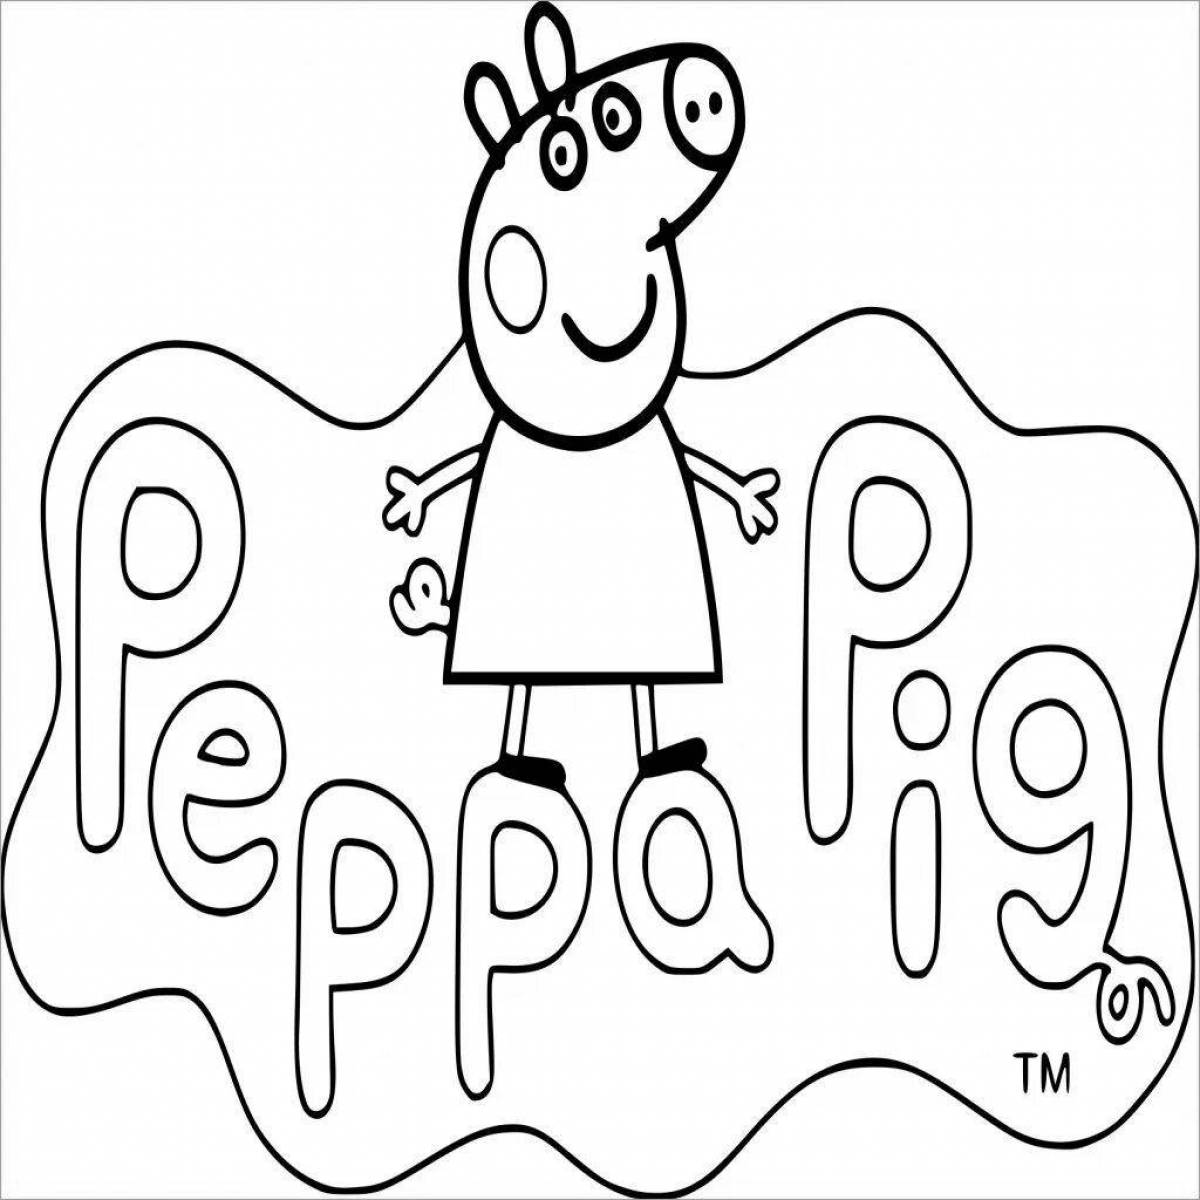 Coloring page luminous peppa pig the frog